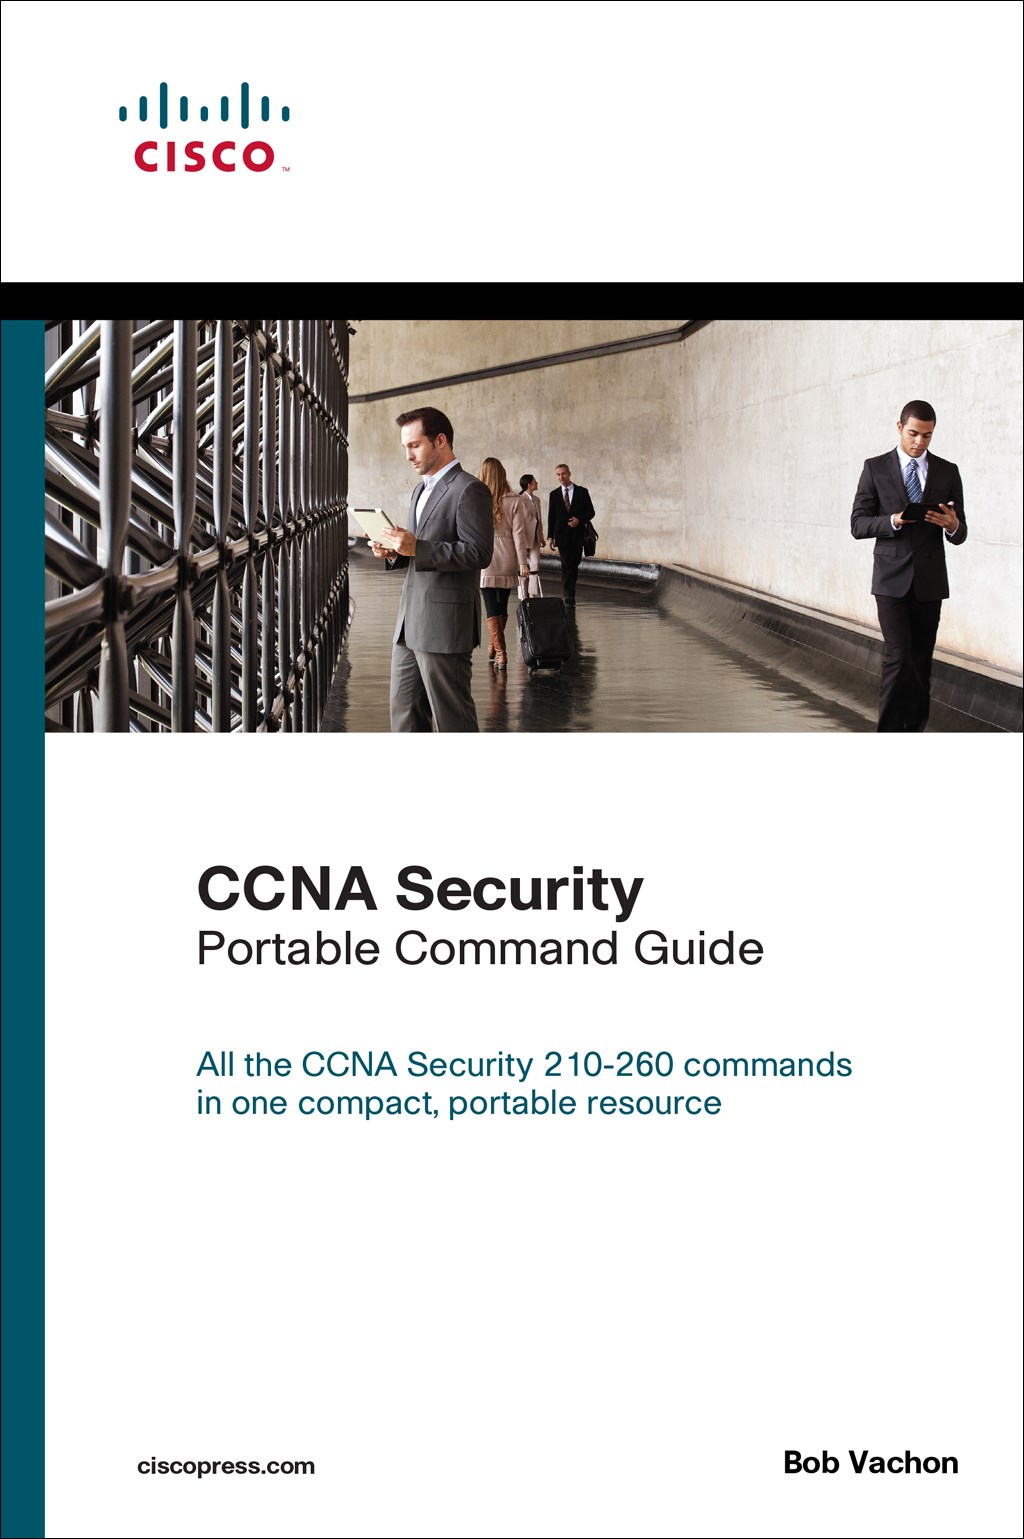 CCNASecurityCover